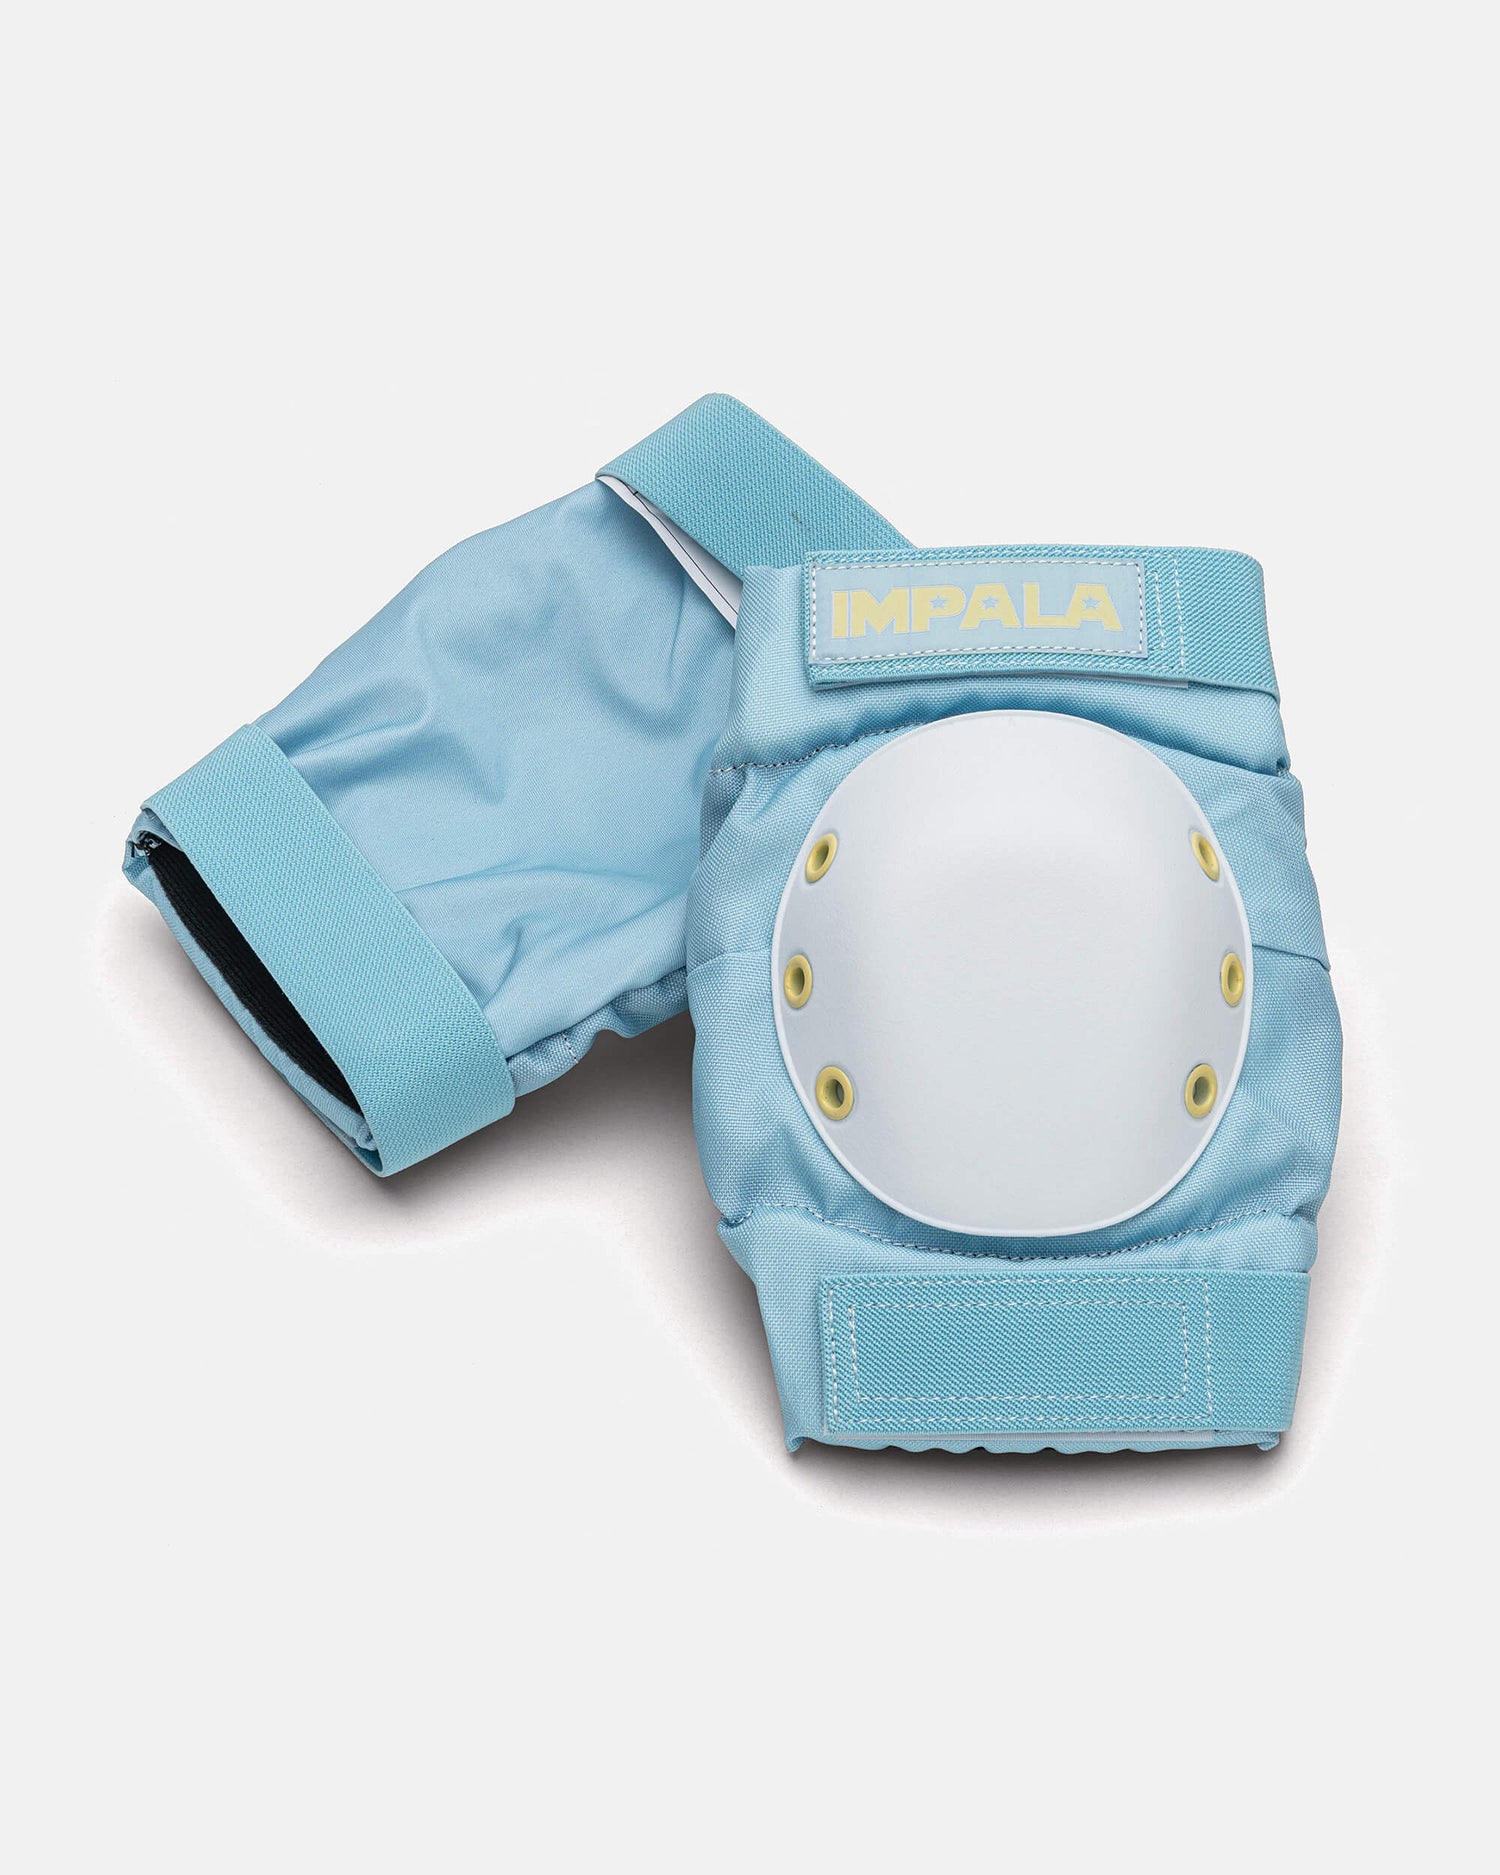 Impala Protective gear Adult Protective Pack - Sky Blue/Yellow in Sky Blue/Yellow